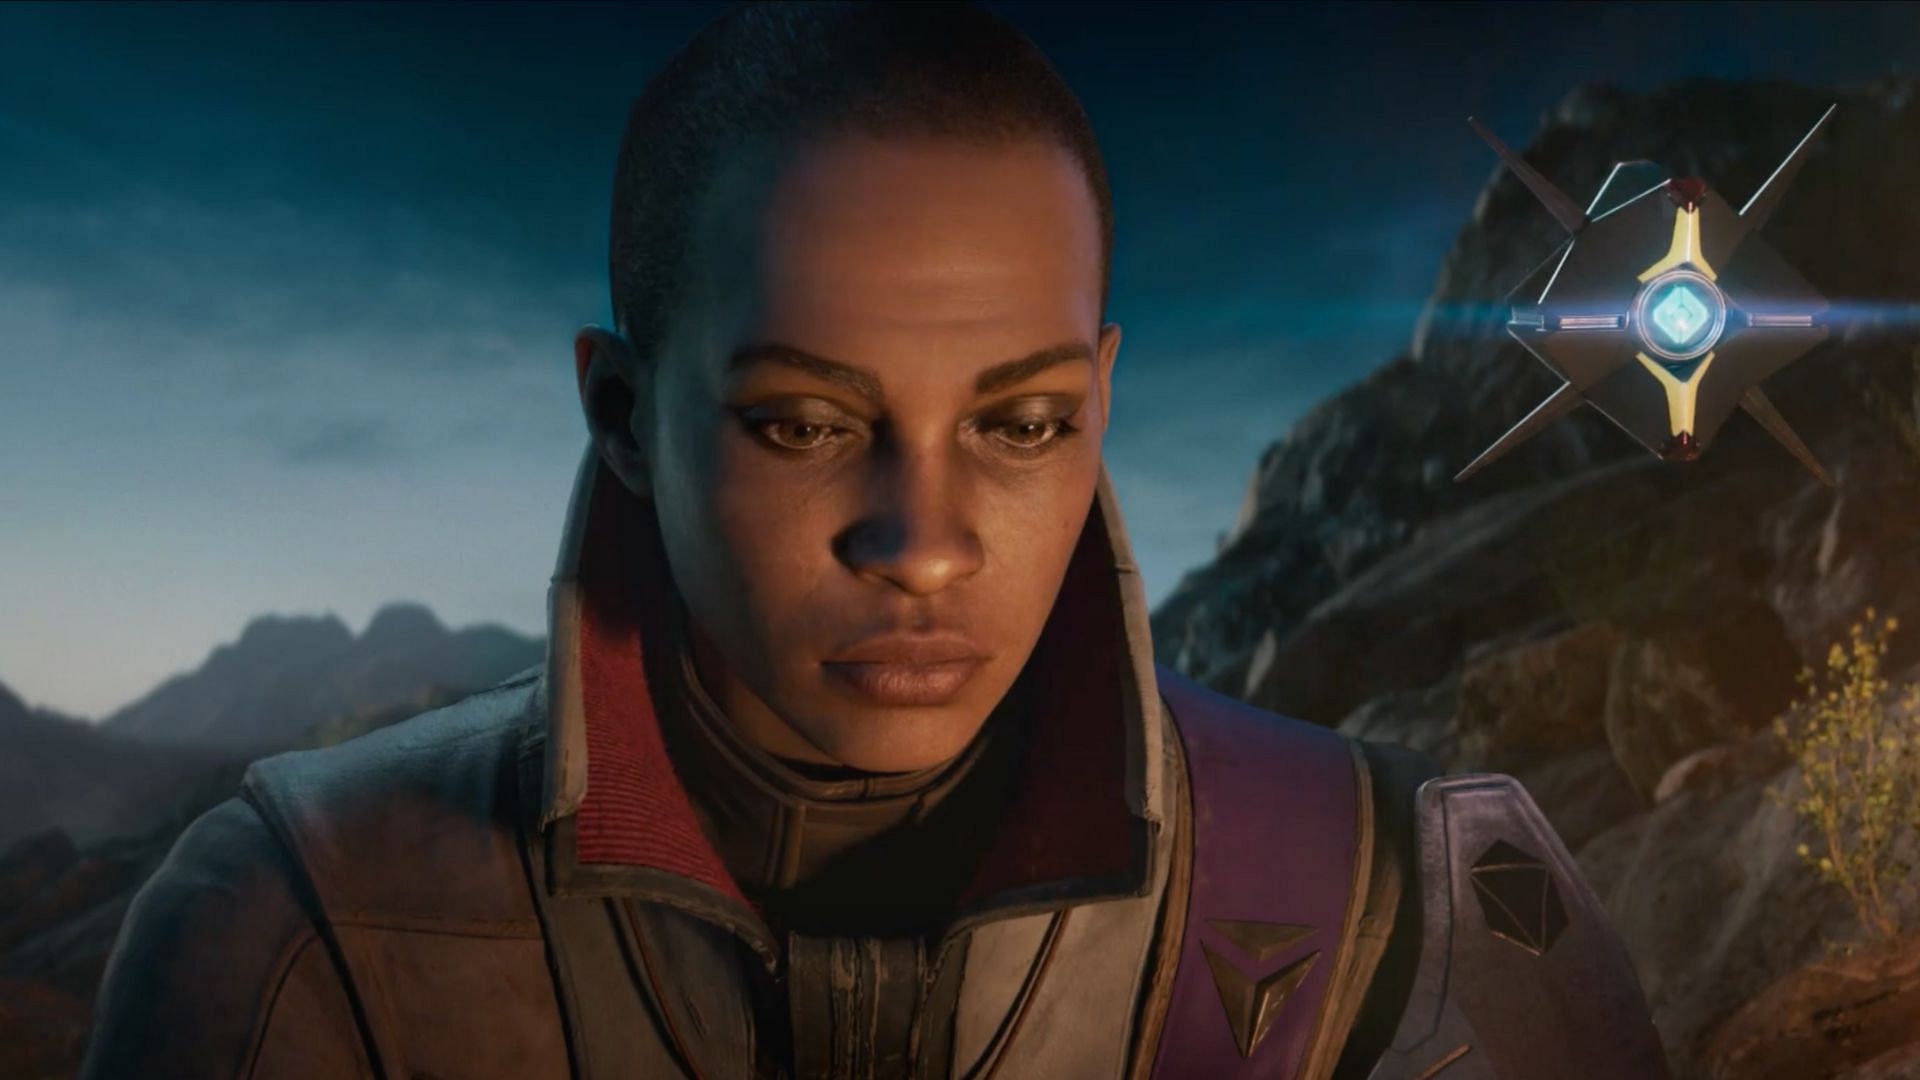 Ikora Rey as shown in The Final Shape teaser with Cayde-6 